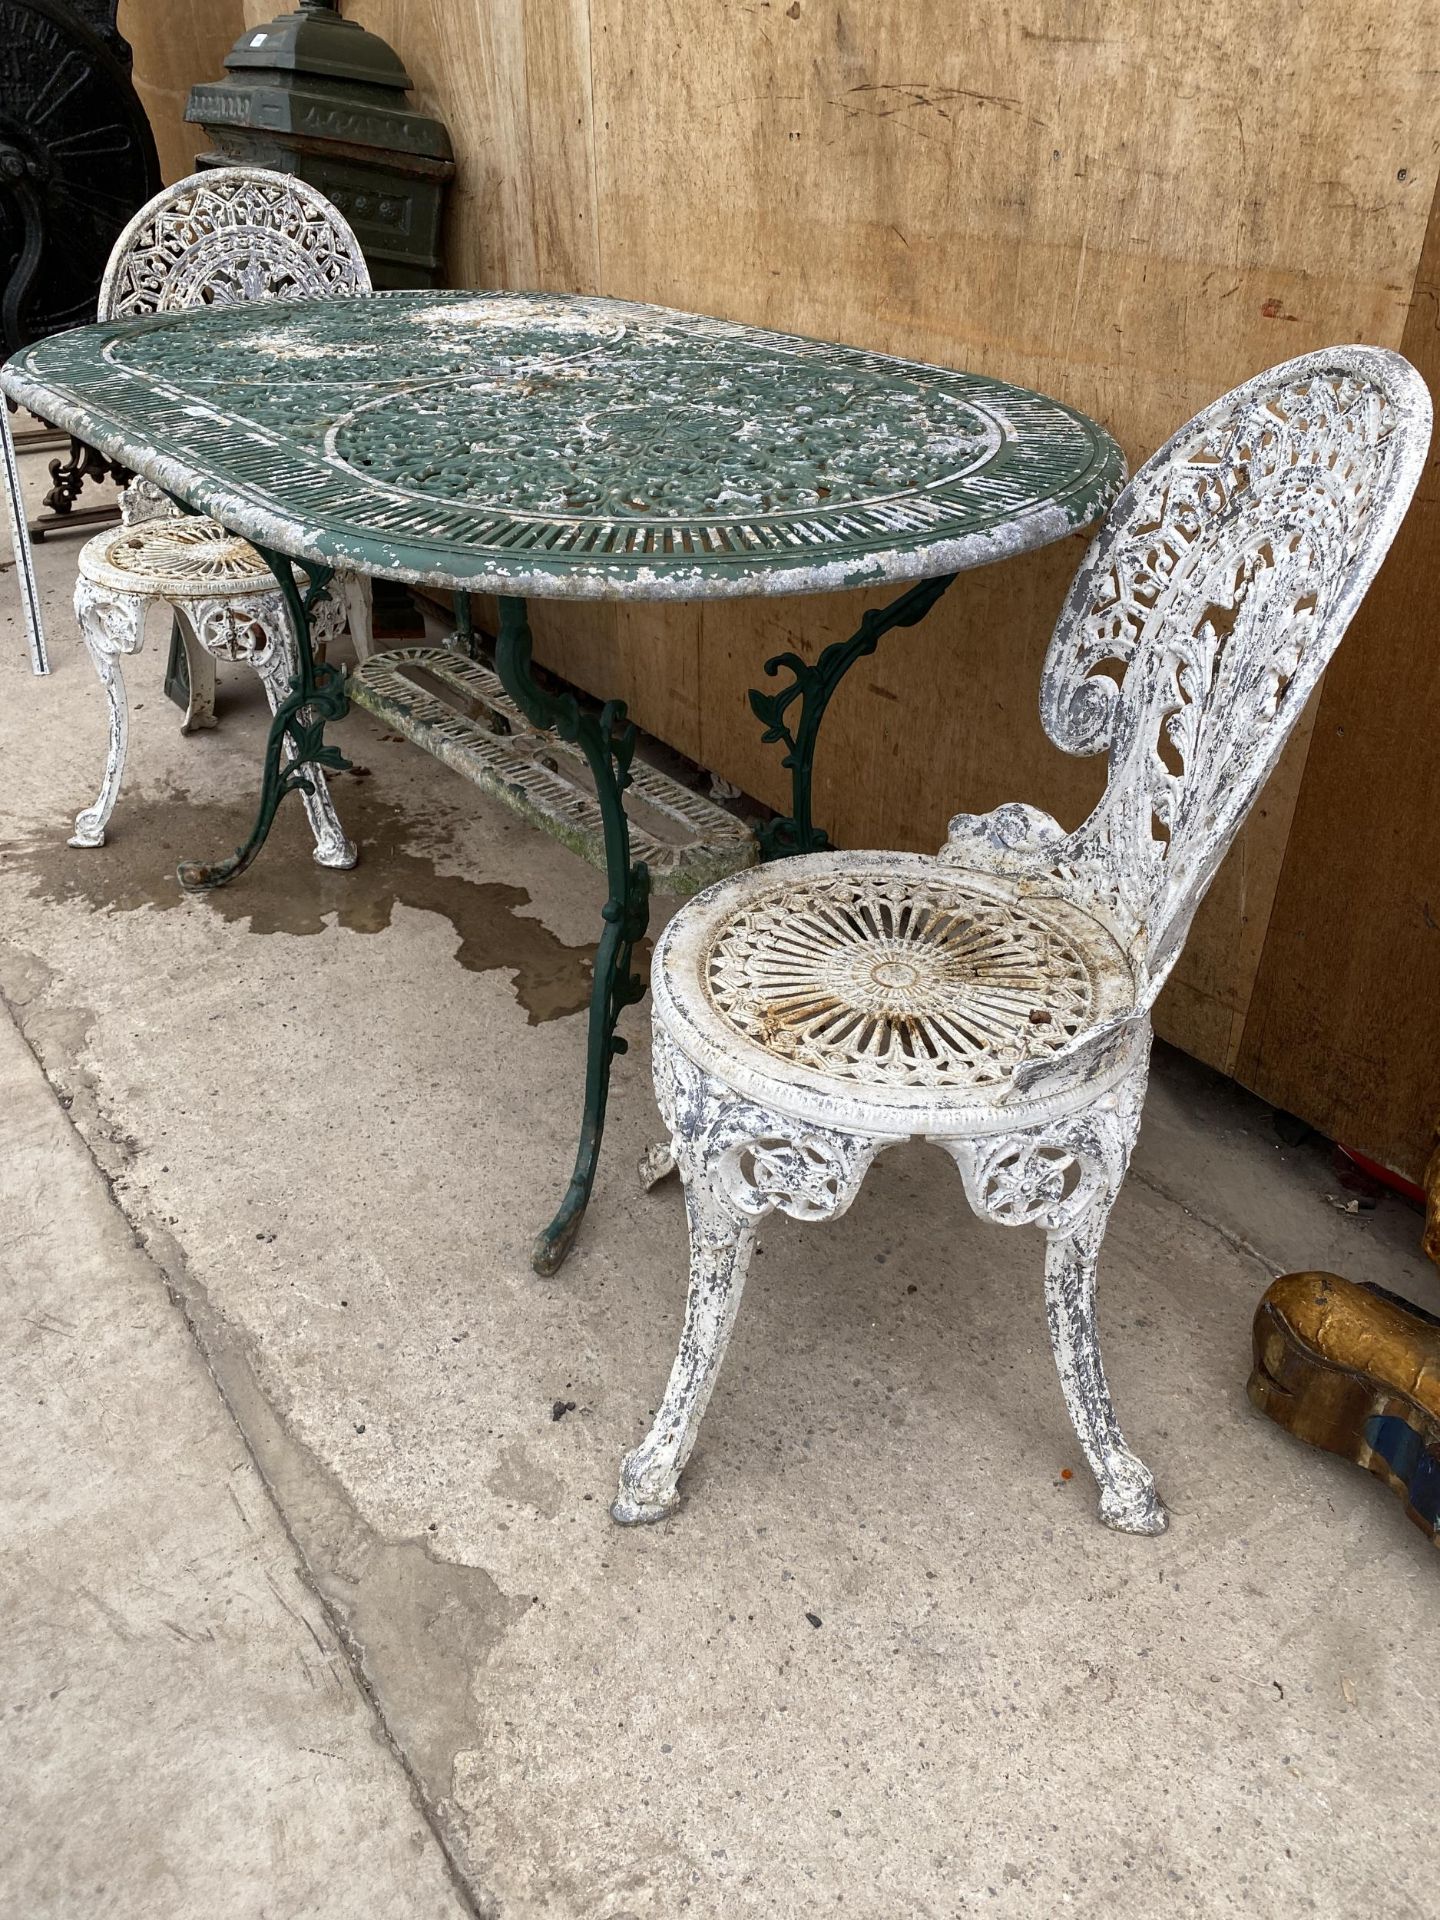 A CAST ALLOY PATIO TABLE AND TWO CAST ALLOY BISTRO CHAIRS - Image 2 of 3